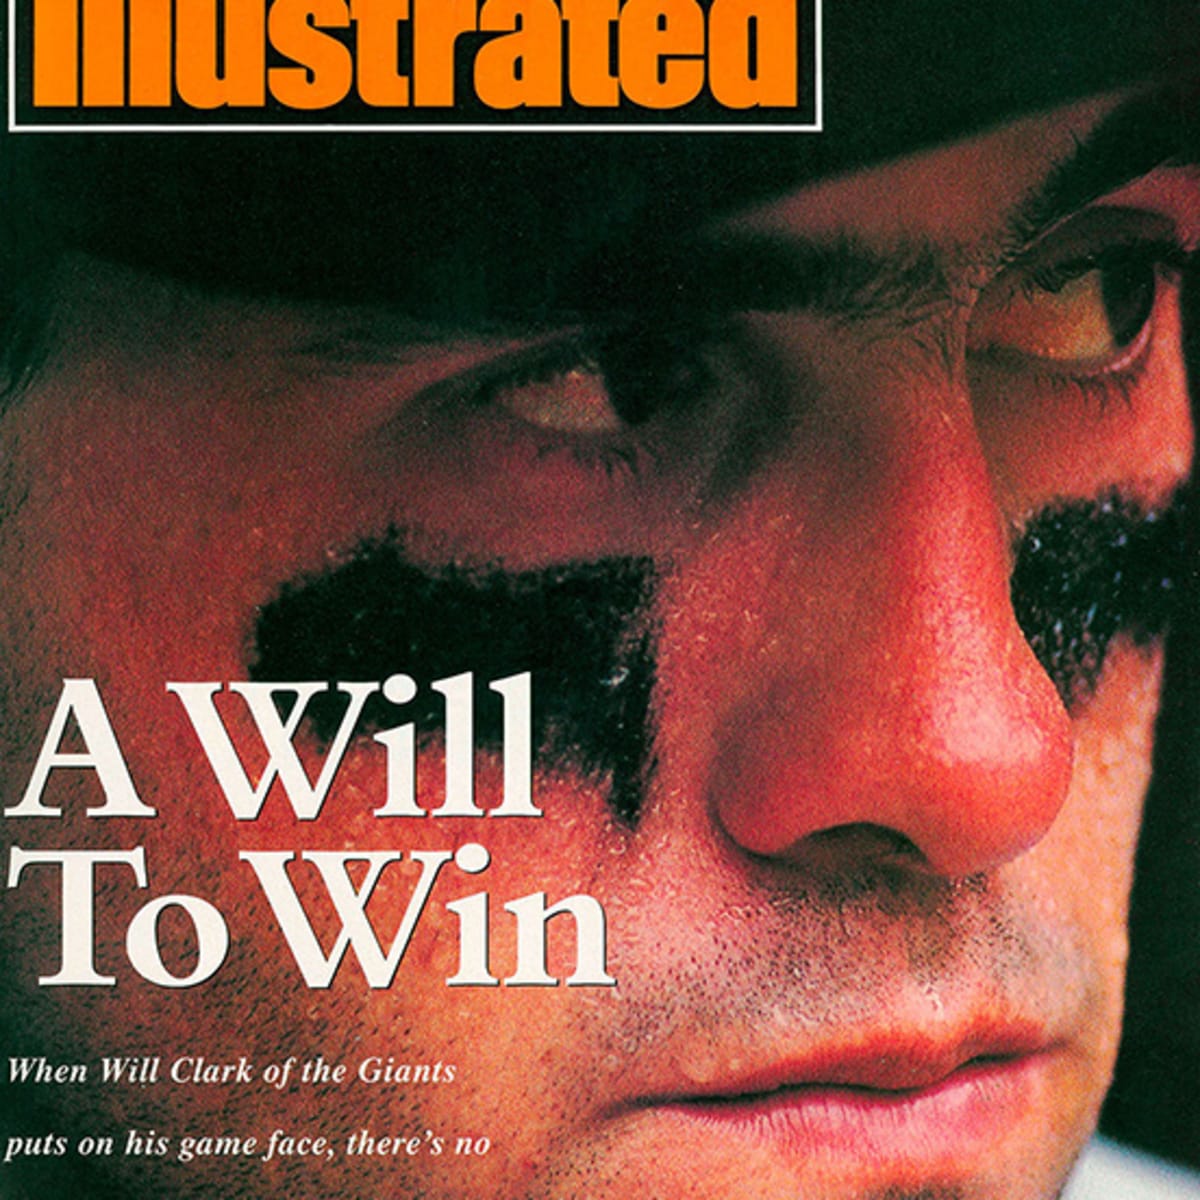 THE MOODY TIGER OF THE REDS - Sports Illustrated Vault